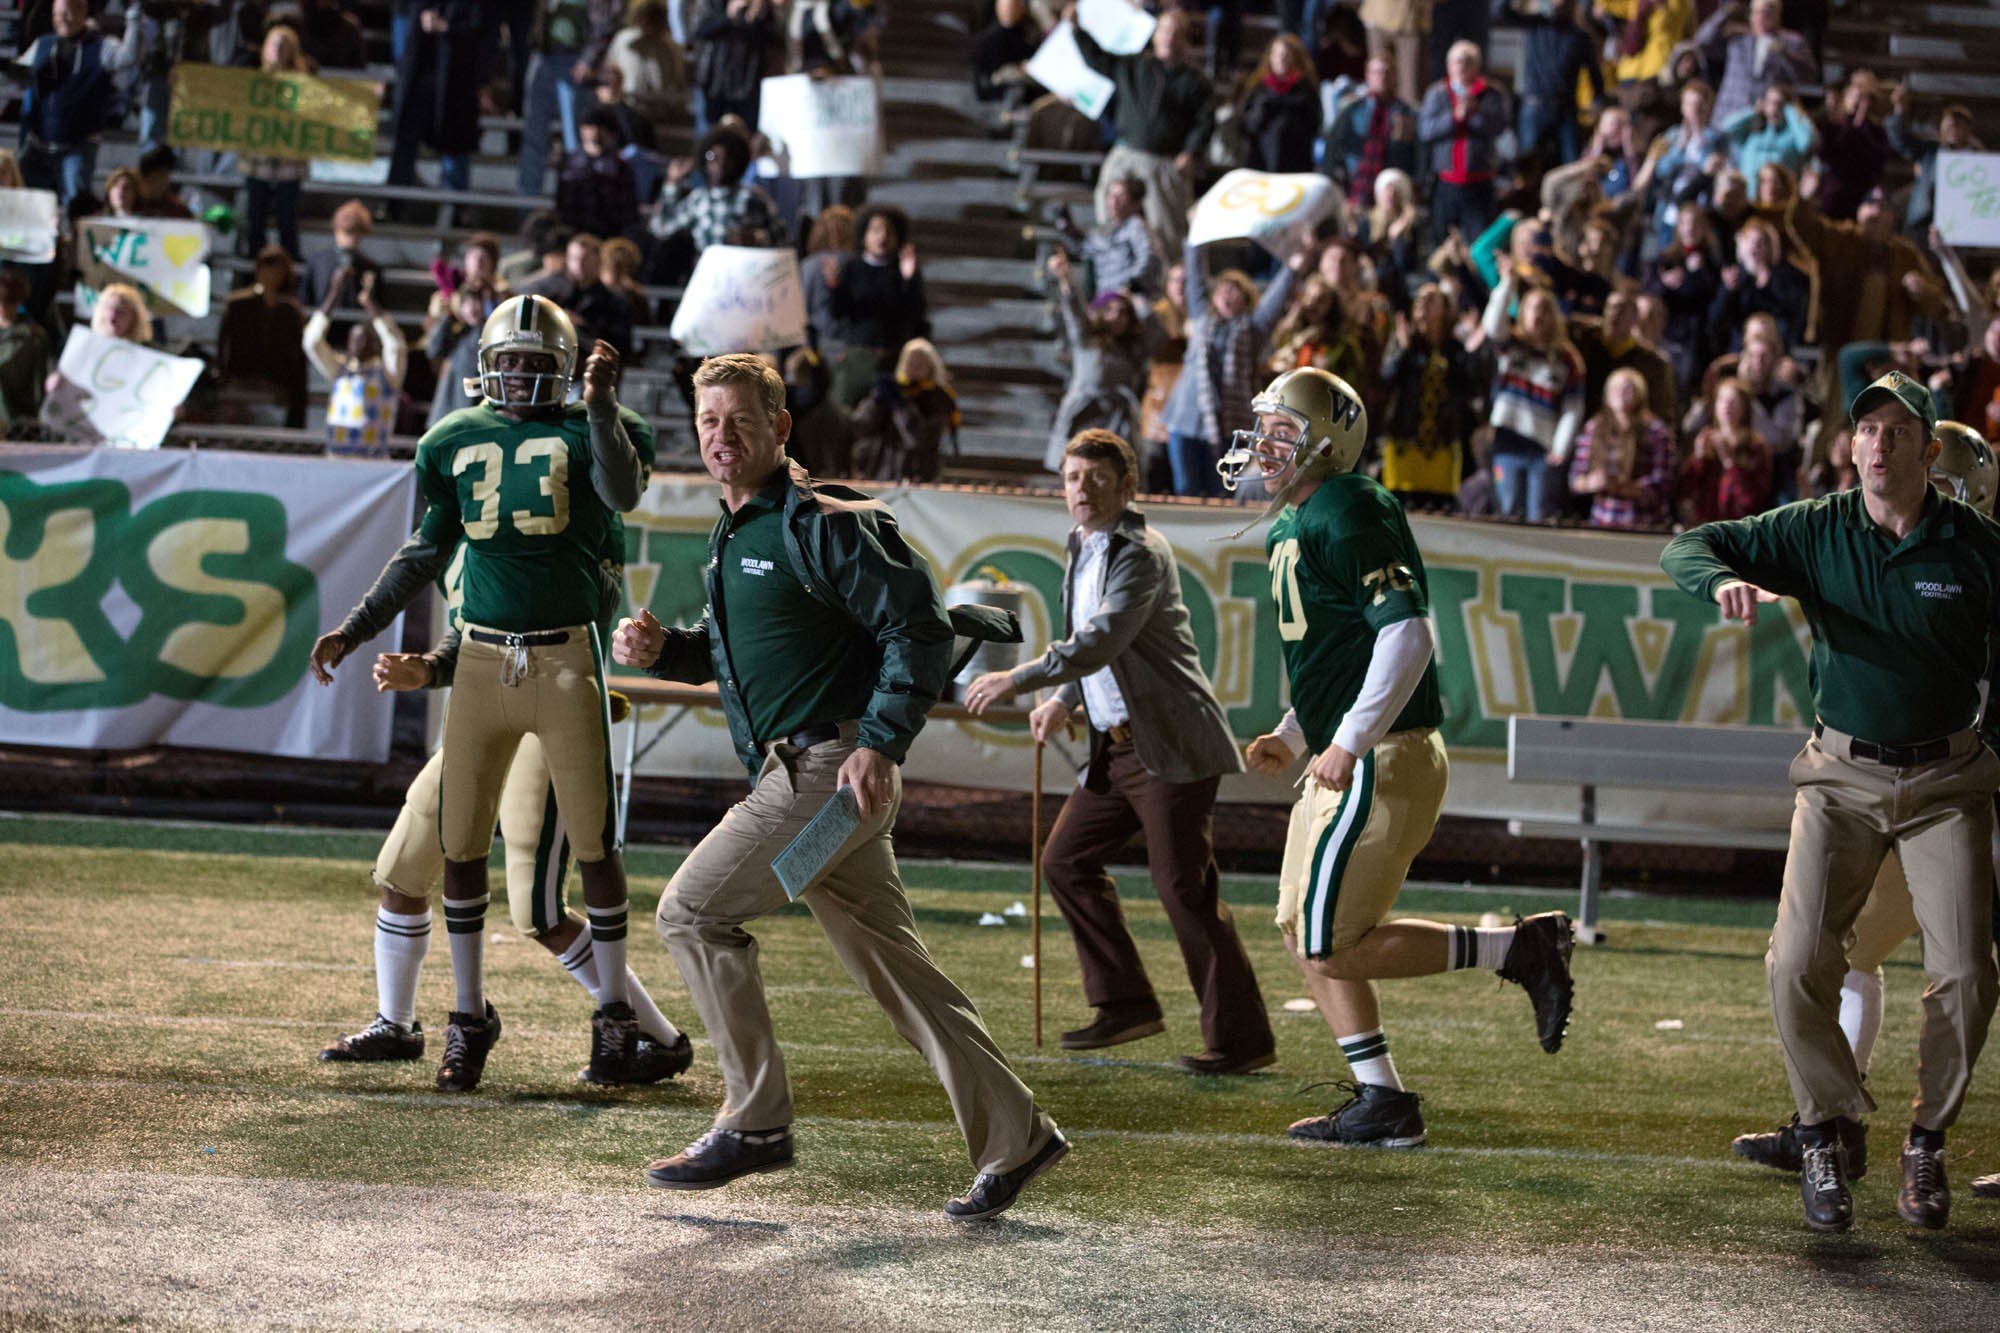 Nicholas Bishop stars as Tandy Gerelds in Pure Flix Entertainment's Woodlawn (2015)